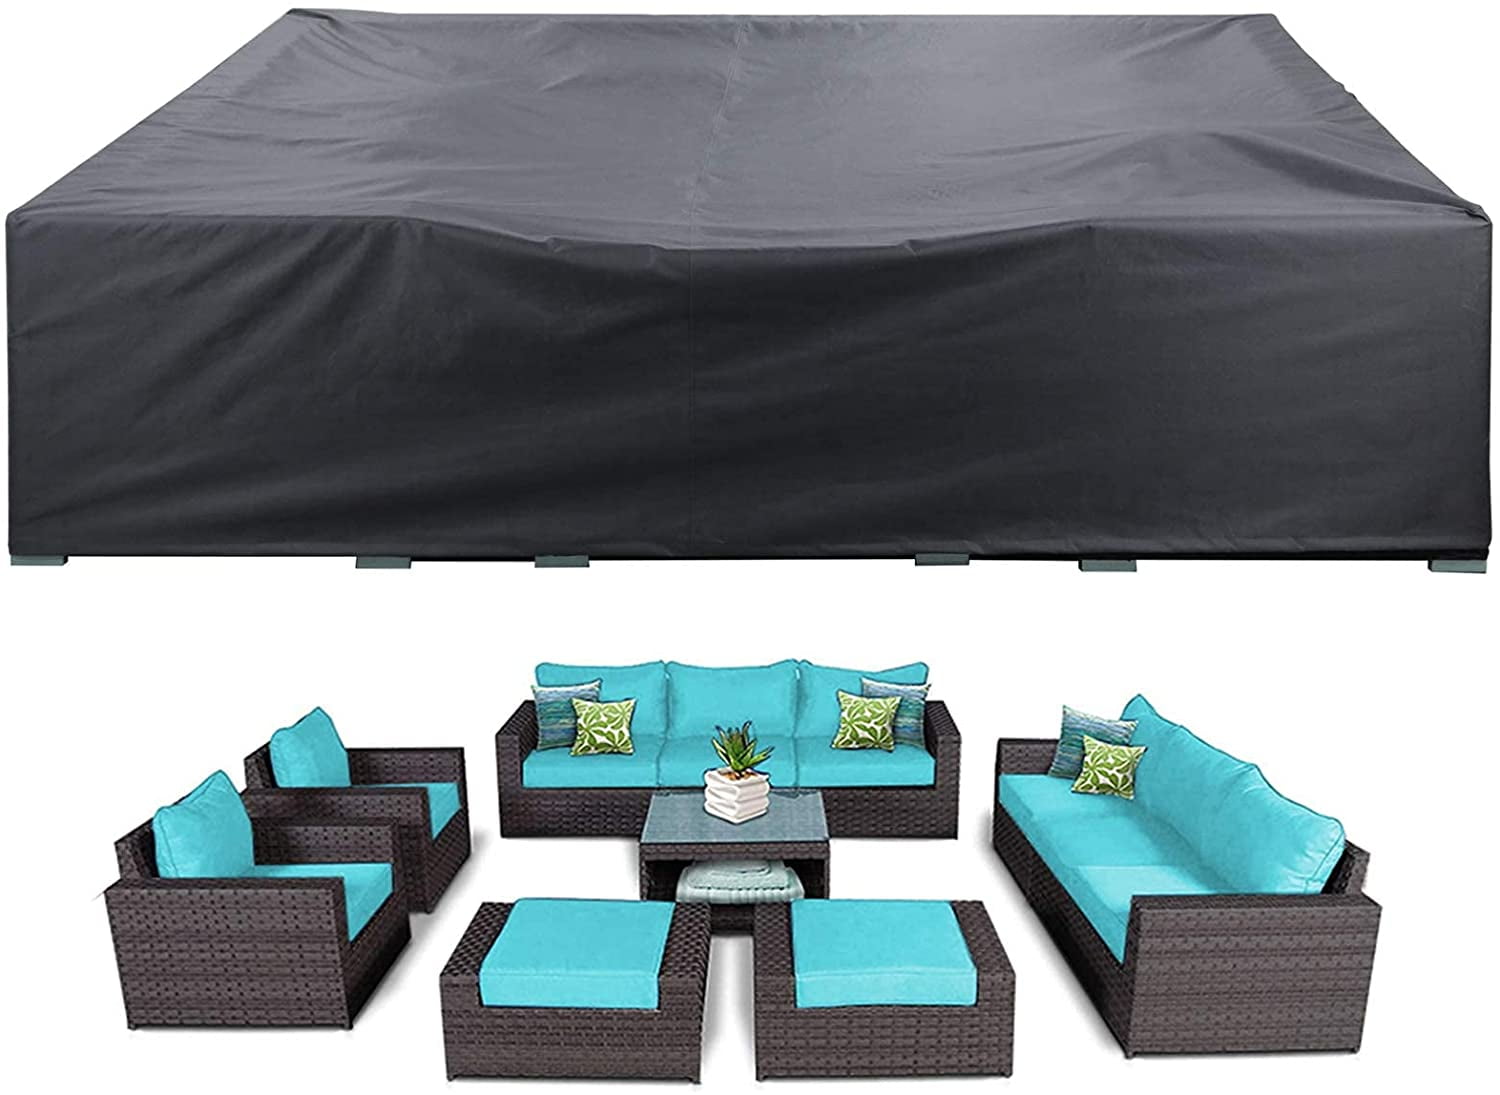 Table Chair Sofa Winter Covers Waterproof Snow Dust Wind Proof Anti-UV 48x48x29 Outdoor Sectional Furniture Set Covers 420D Essort Patio Furniture Covers